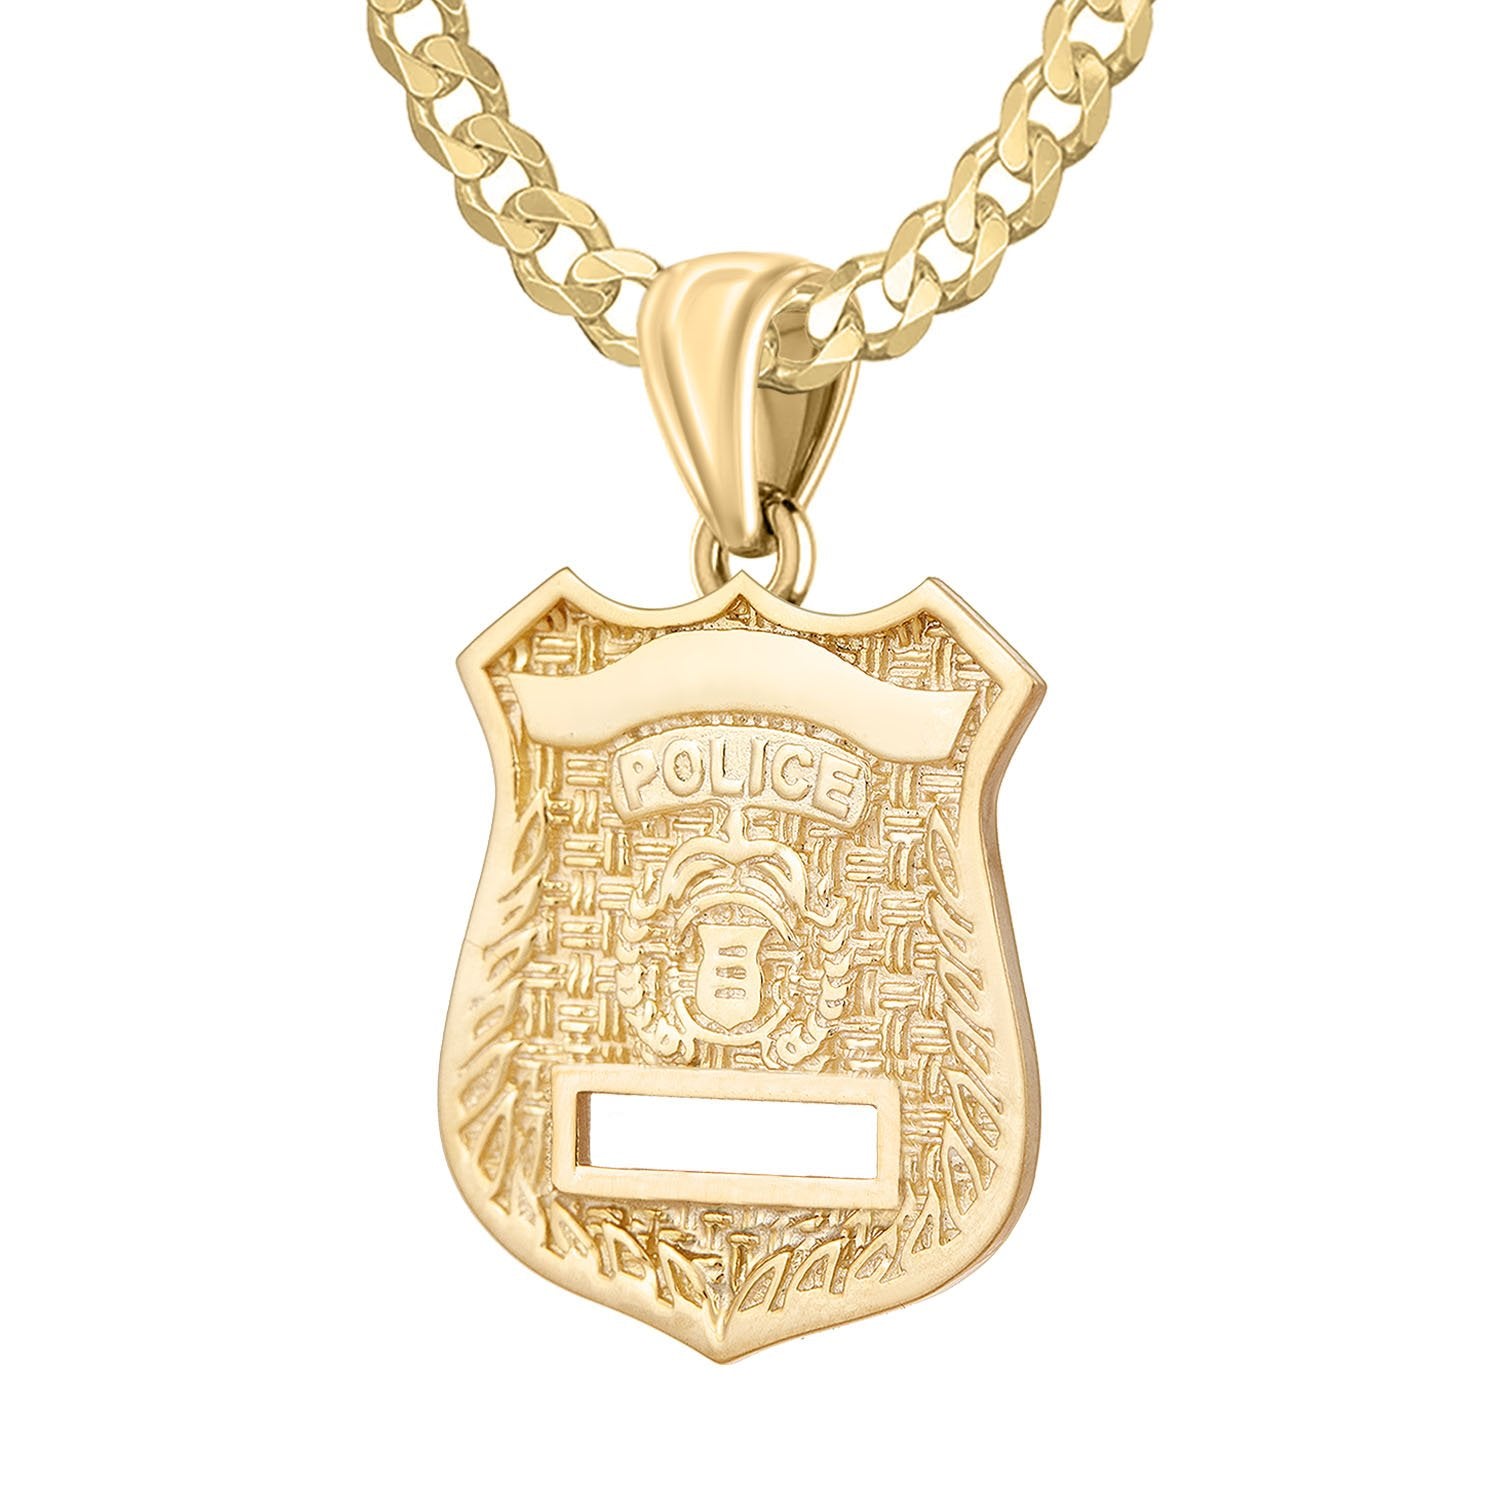 Police Badge Necklace In Gold of 26mm - 3.6mm Curb Chain